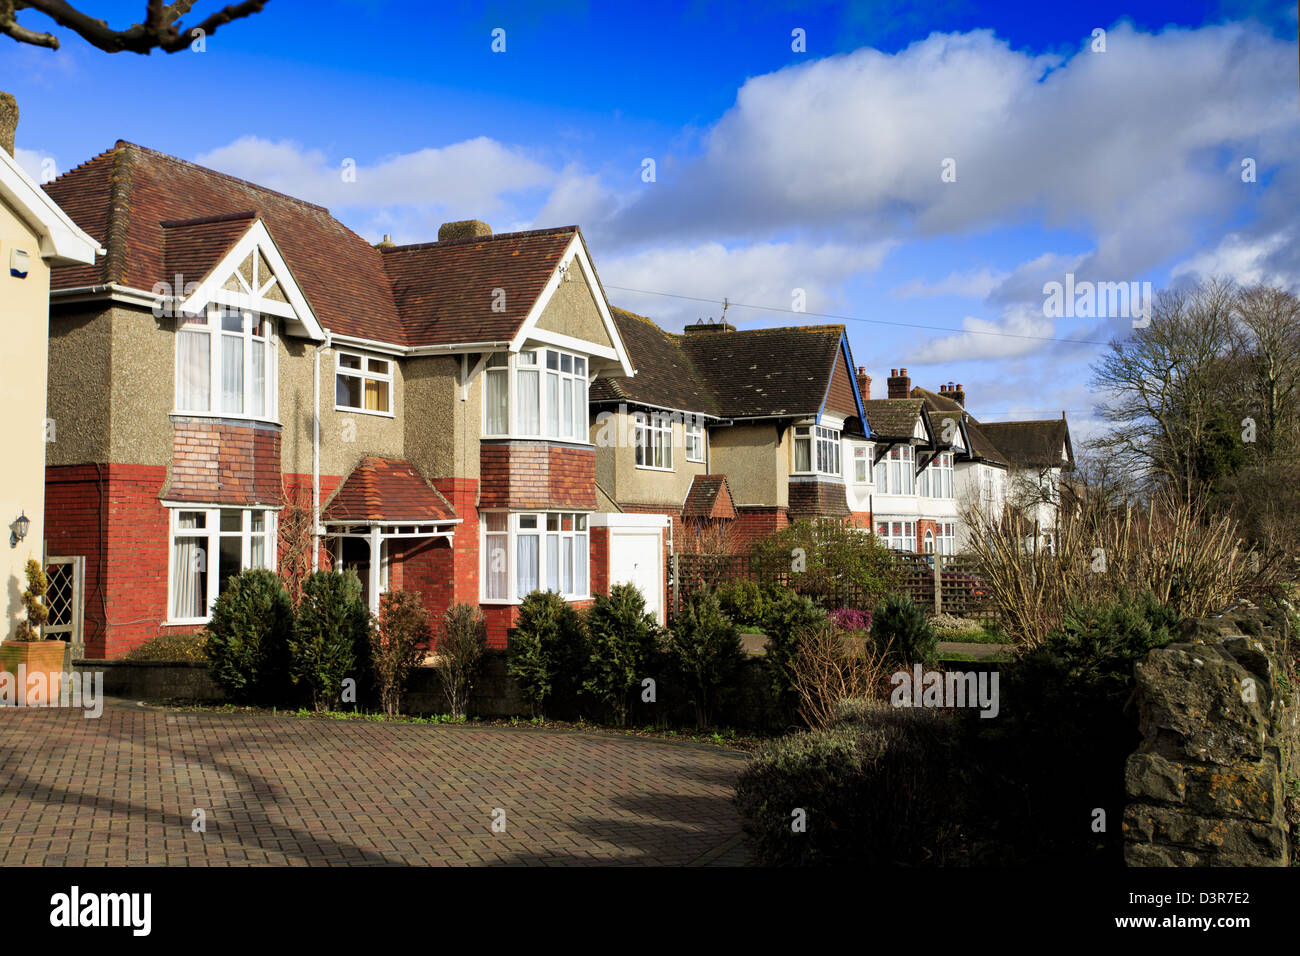 Row of traditional detached houses in Swindon, UK Stock Photo